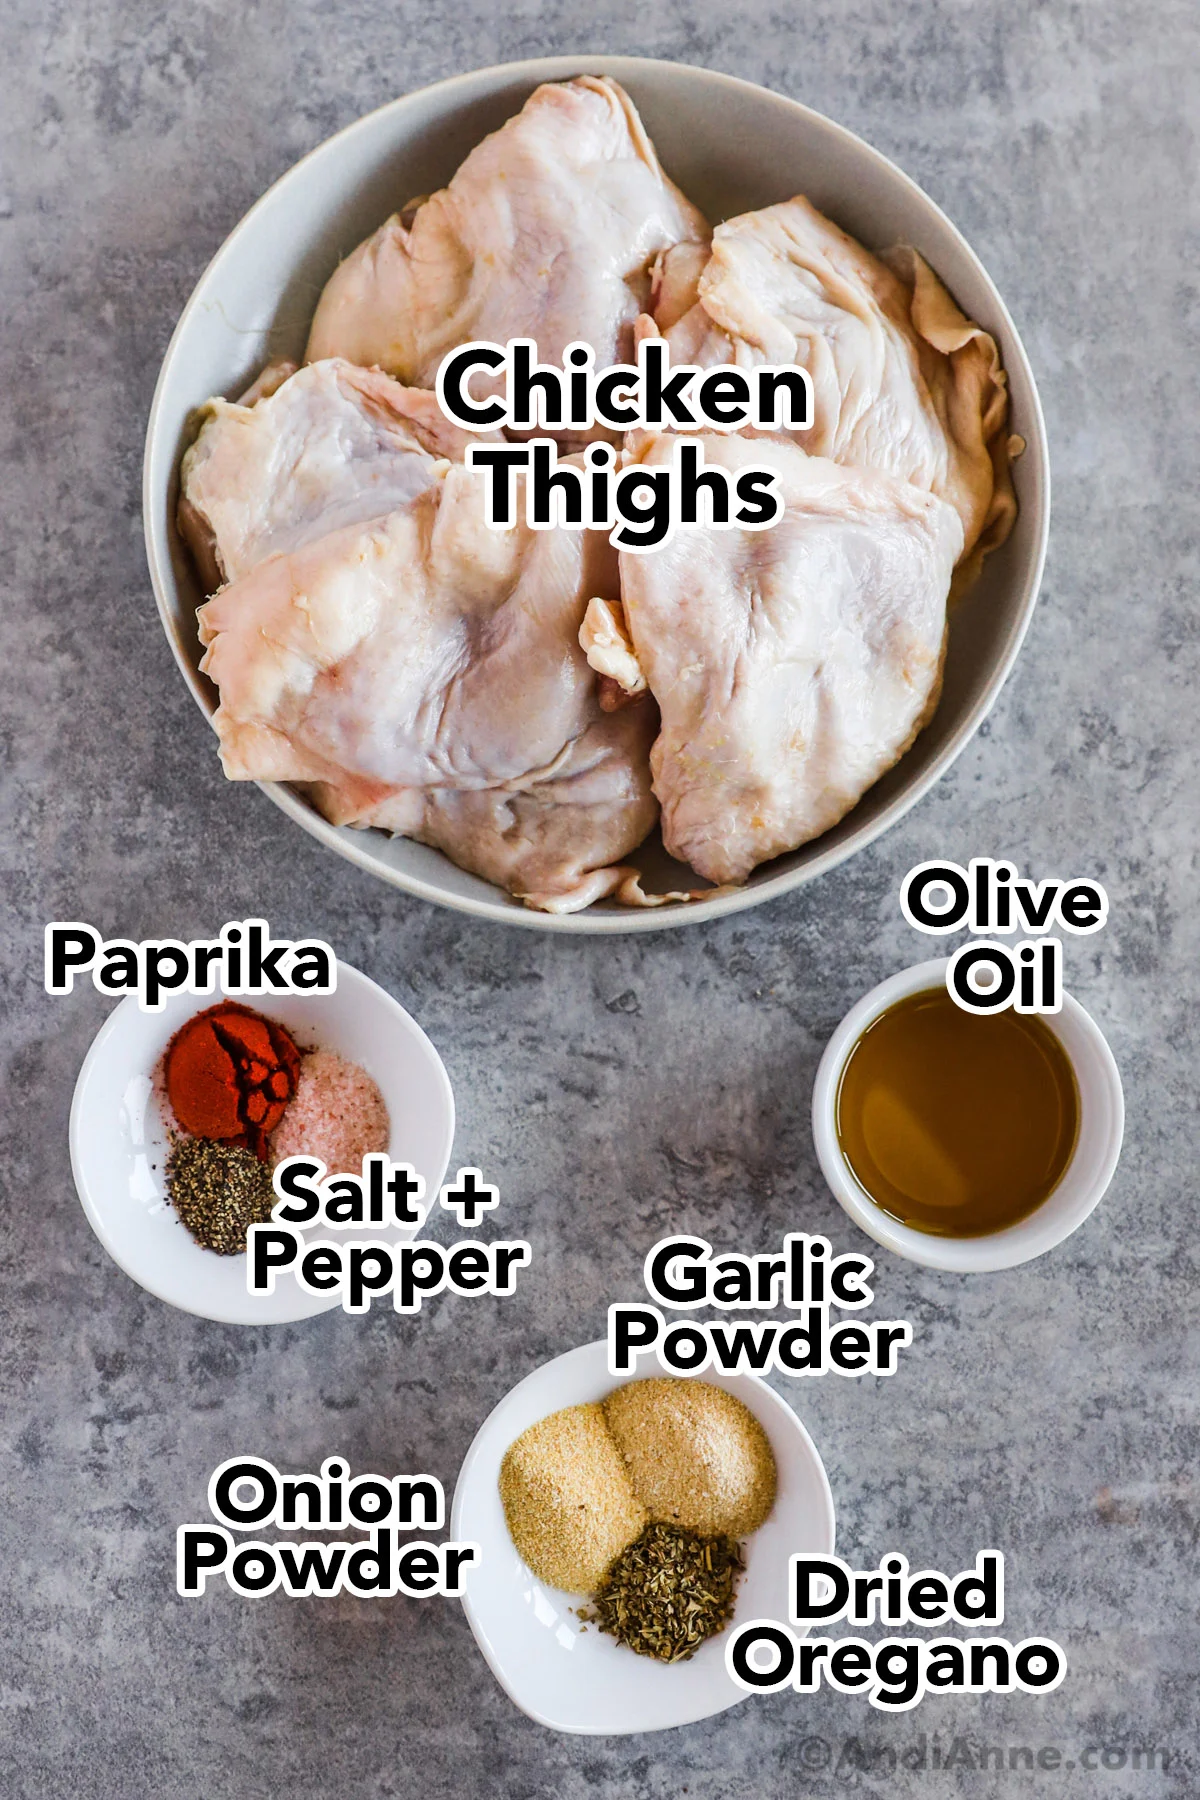 Recipe ingredients including raw chicken thighs on a plate, a cup of olive oil and small cups with spices.